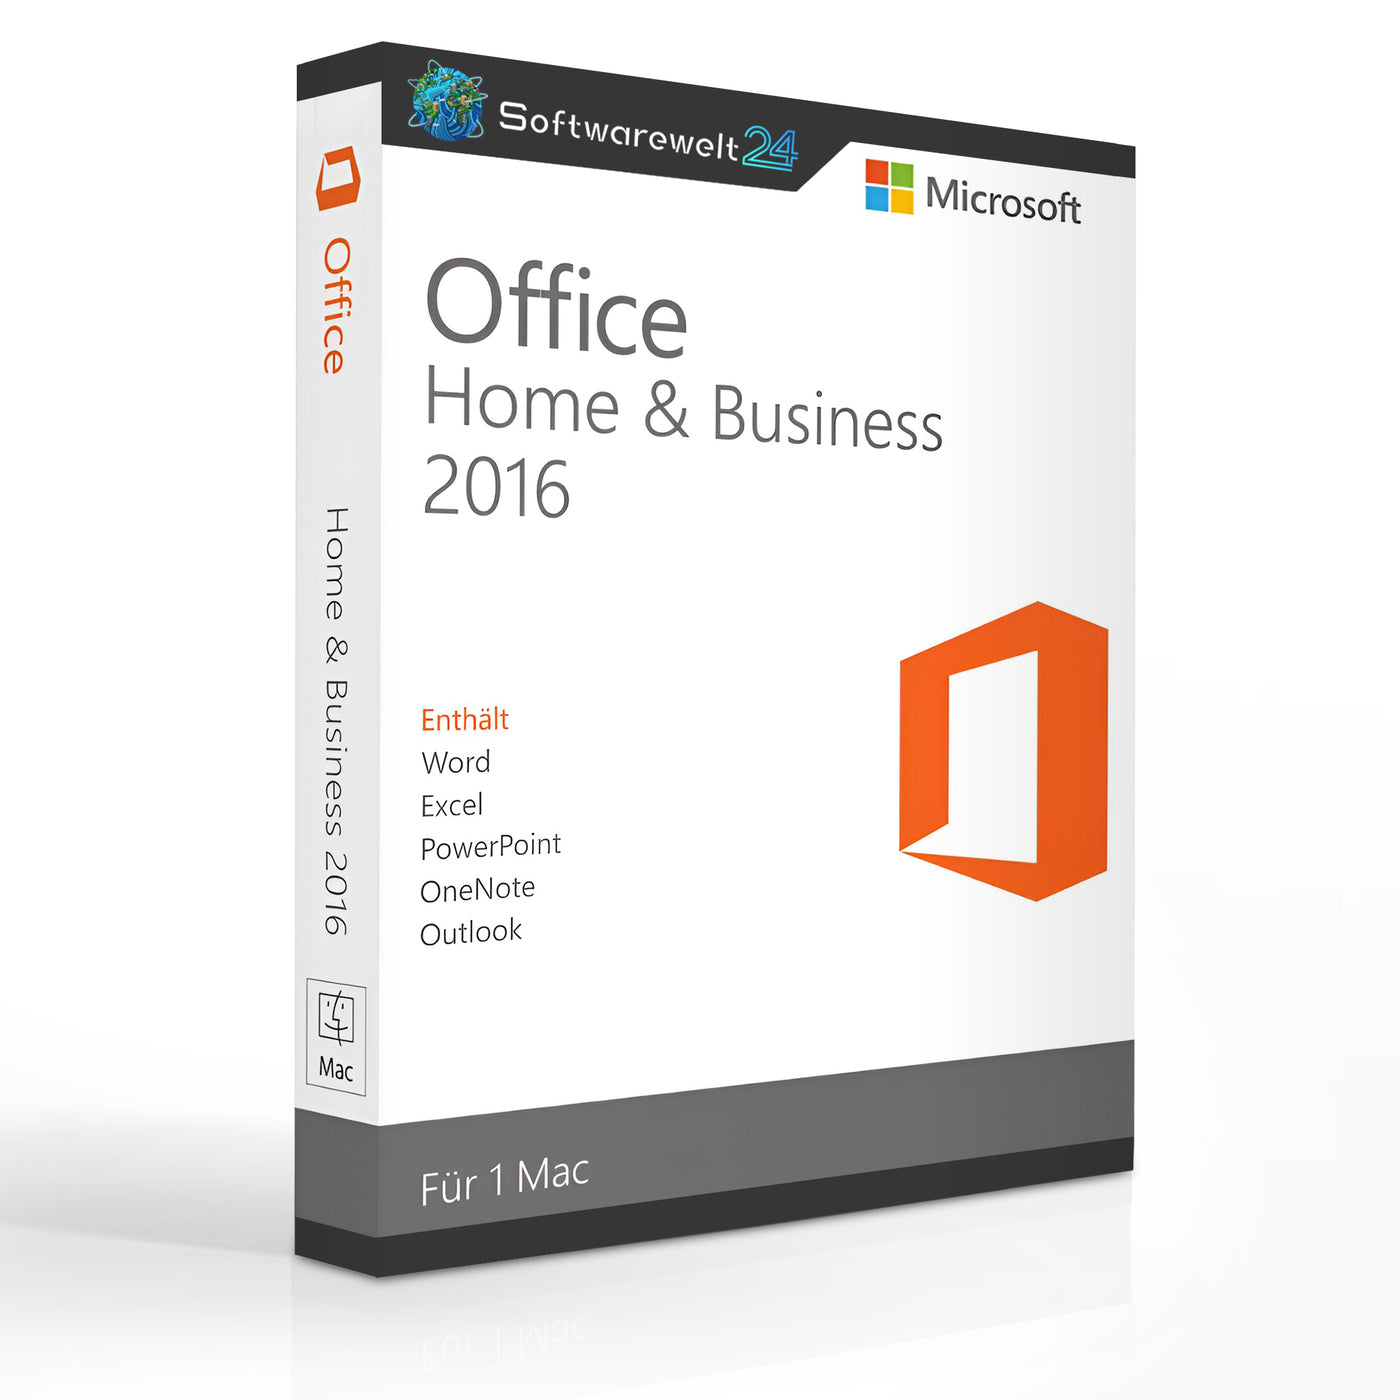 #Office 2016 Home & Business